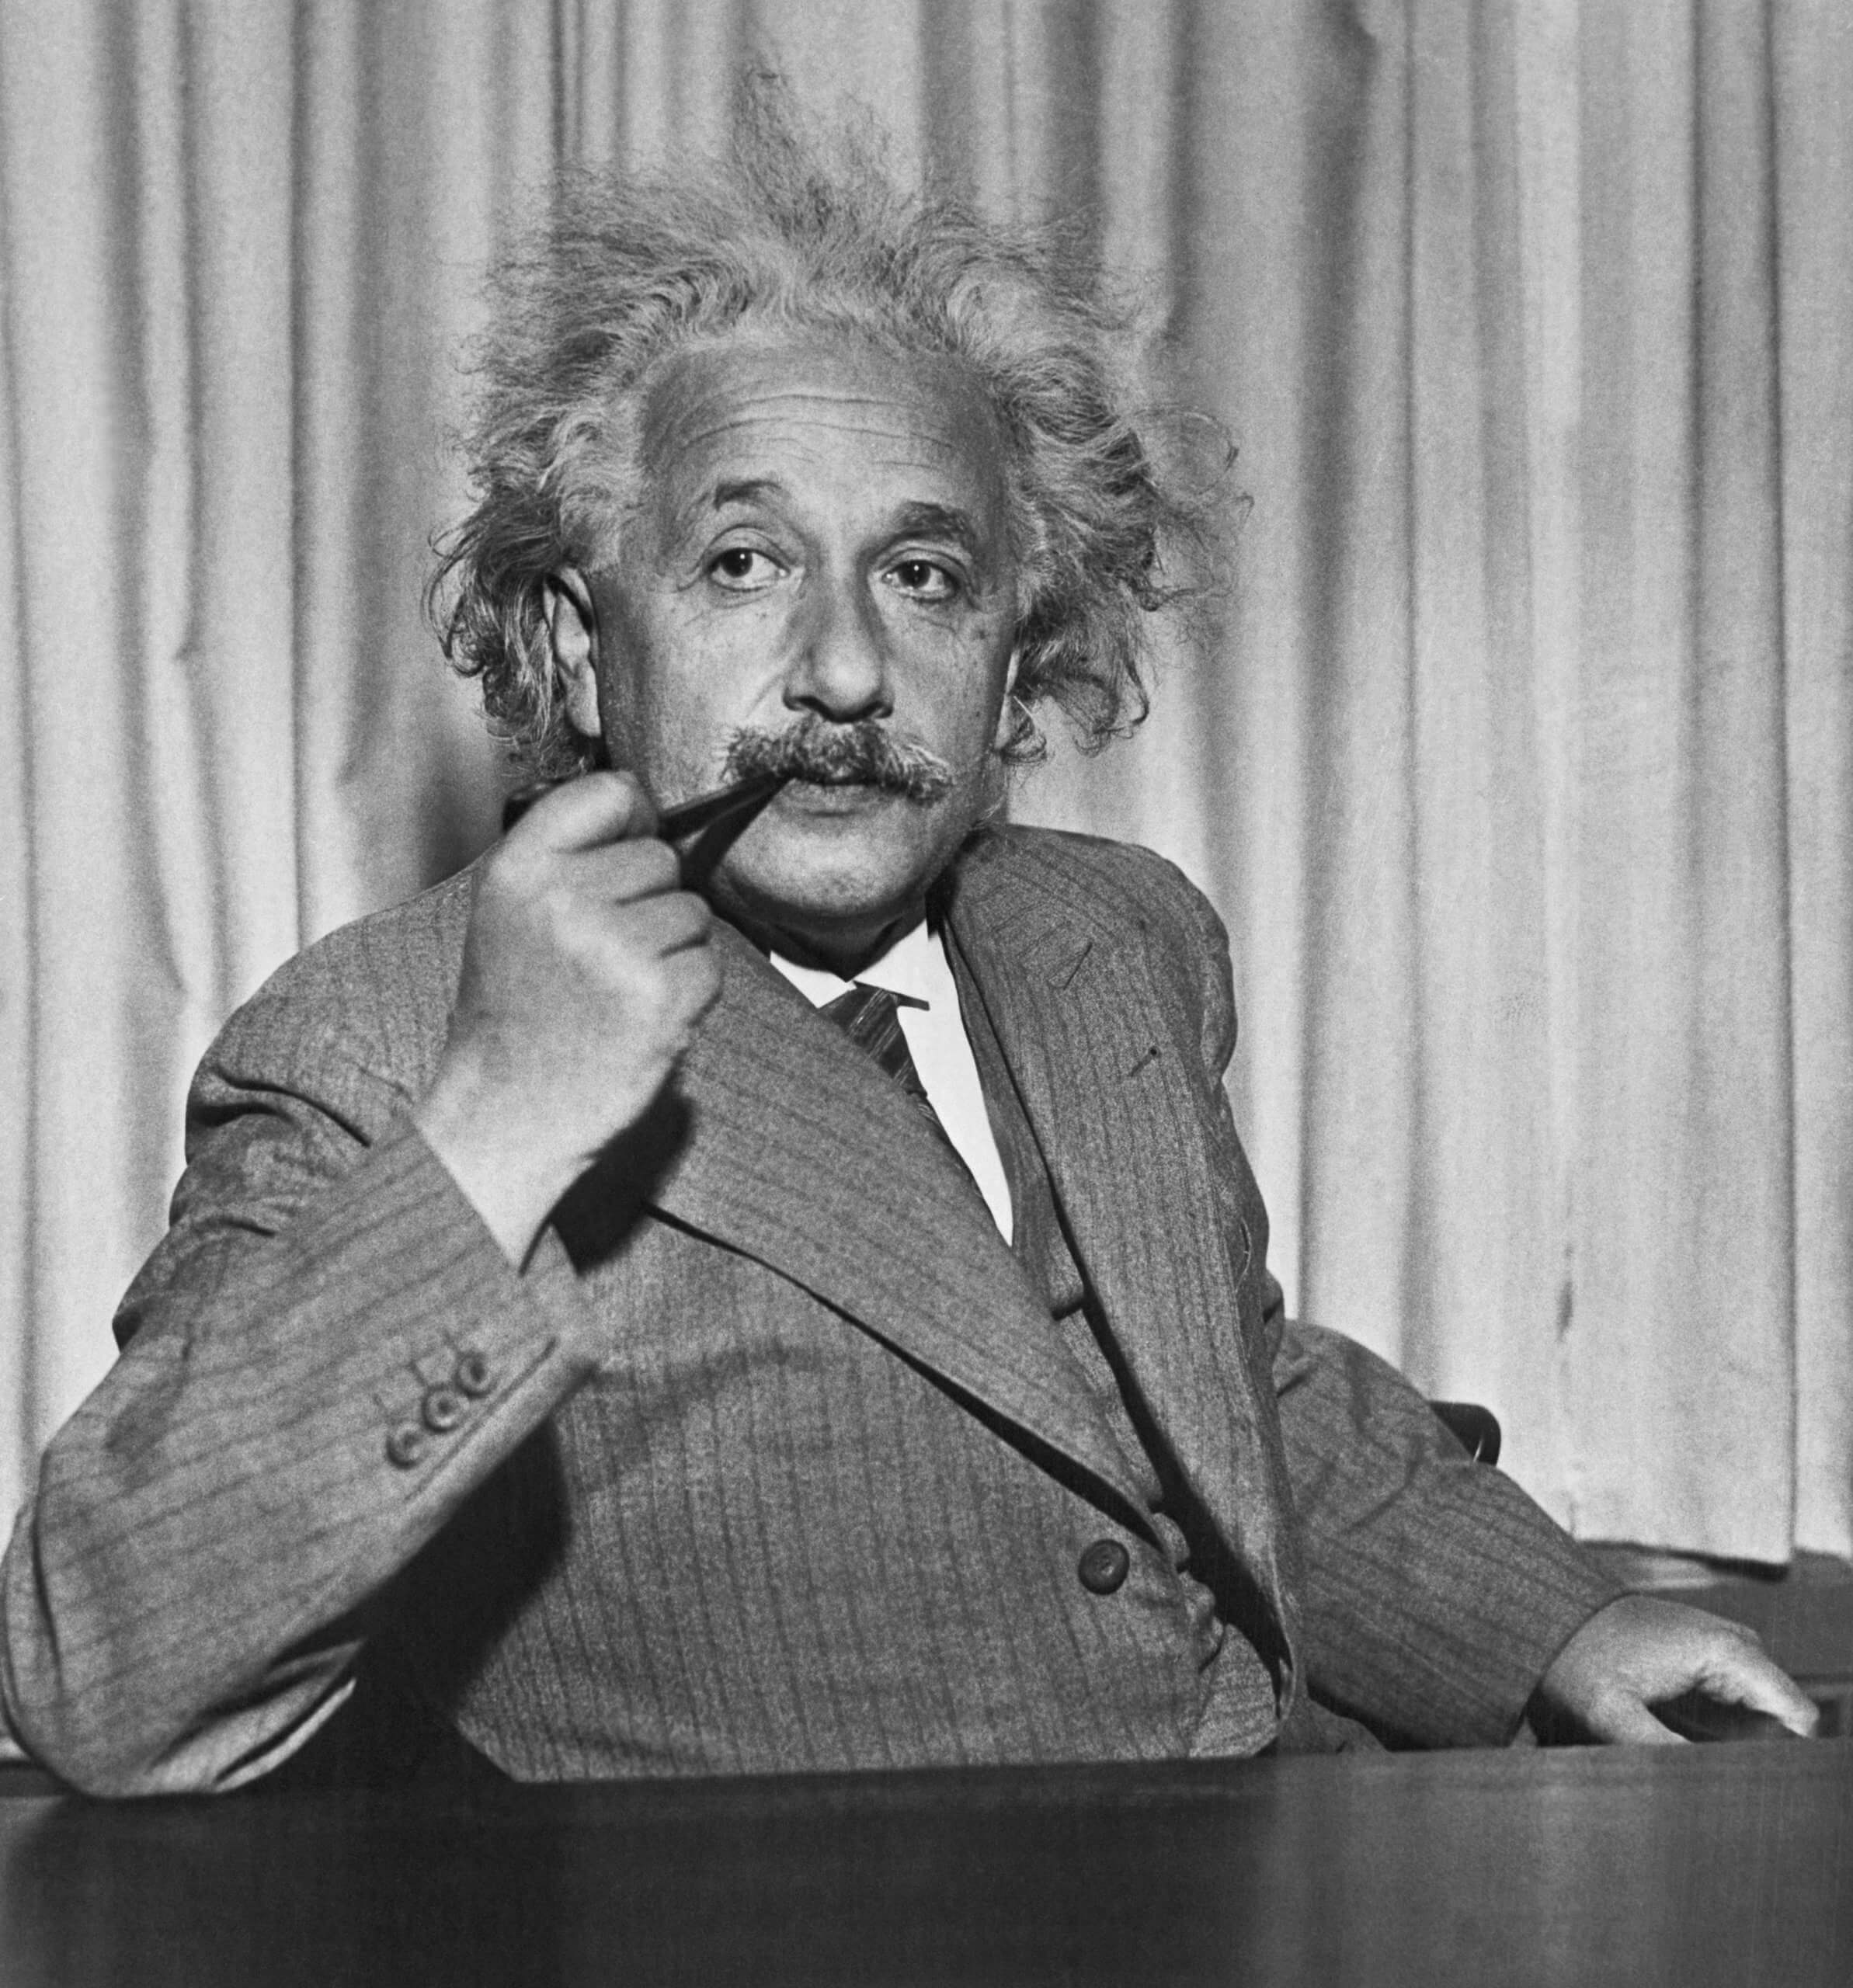 professor-albert-einstein-now-exiled-from-germany-calmly-news-photo-517294006-1551964862